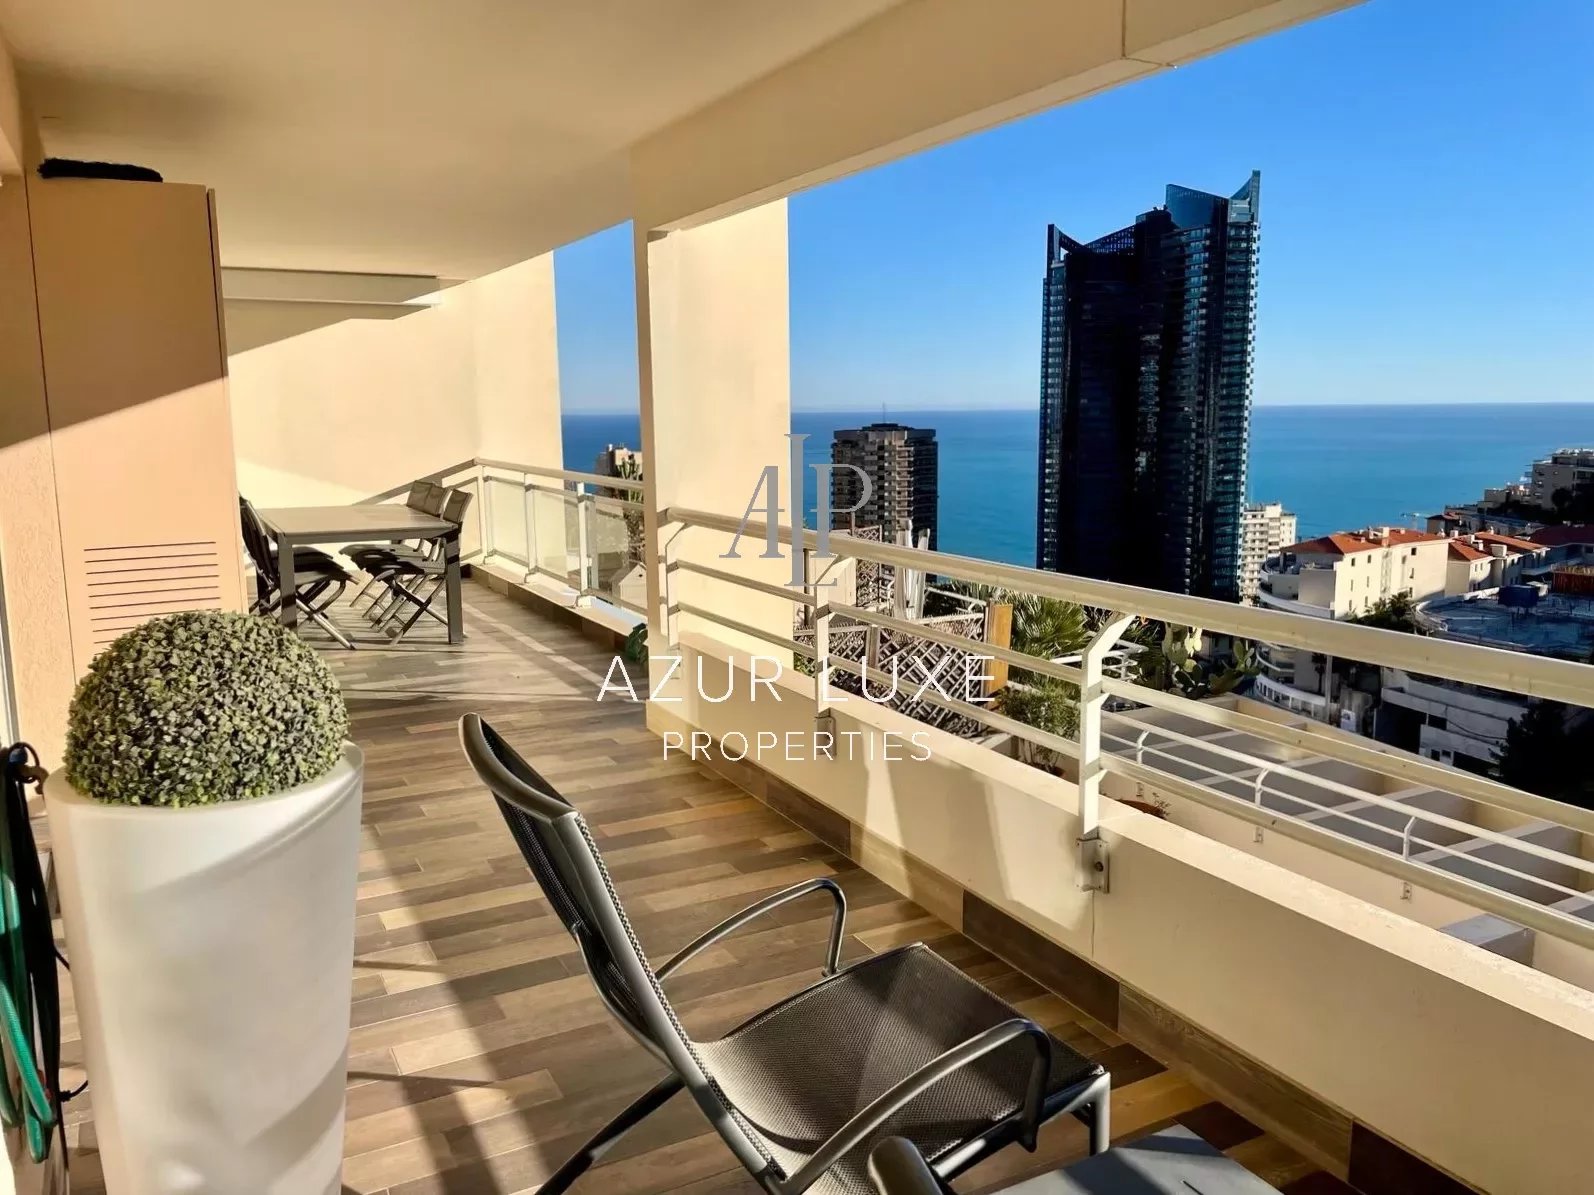 Luxury residence - 3 rooms 80 m² - Sea View - Terrace - Cellar - Parking